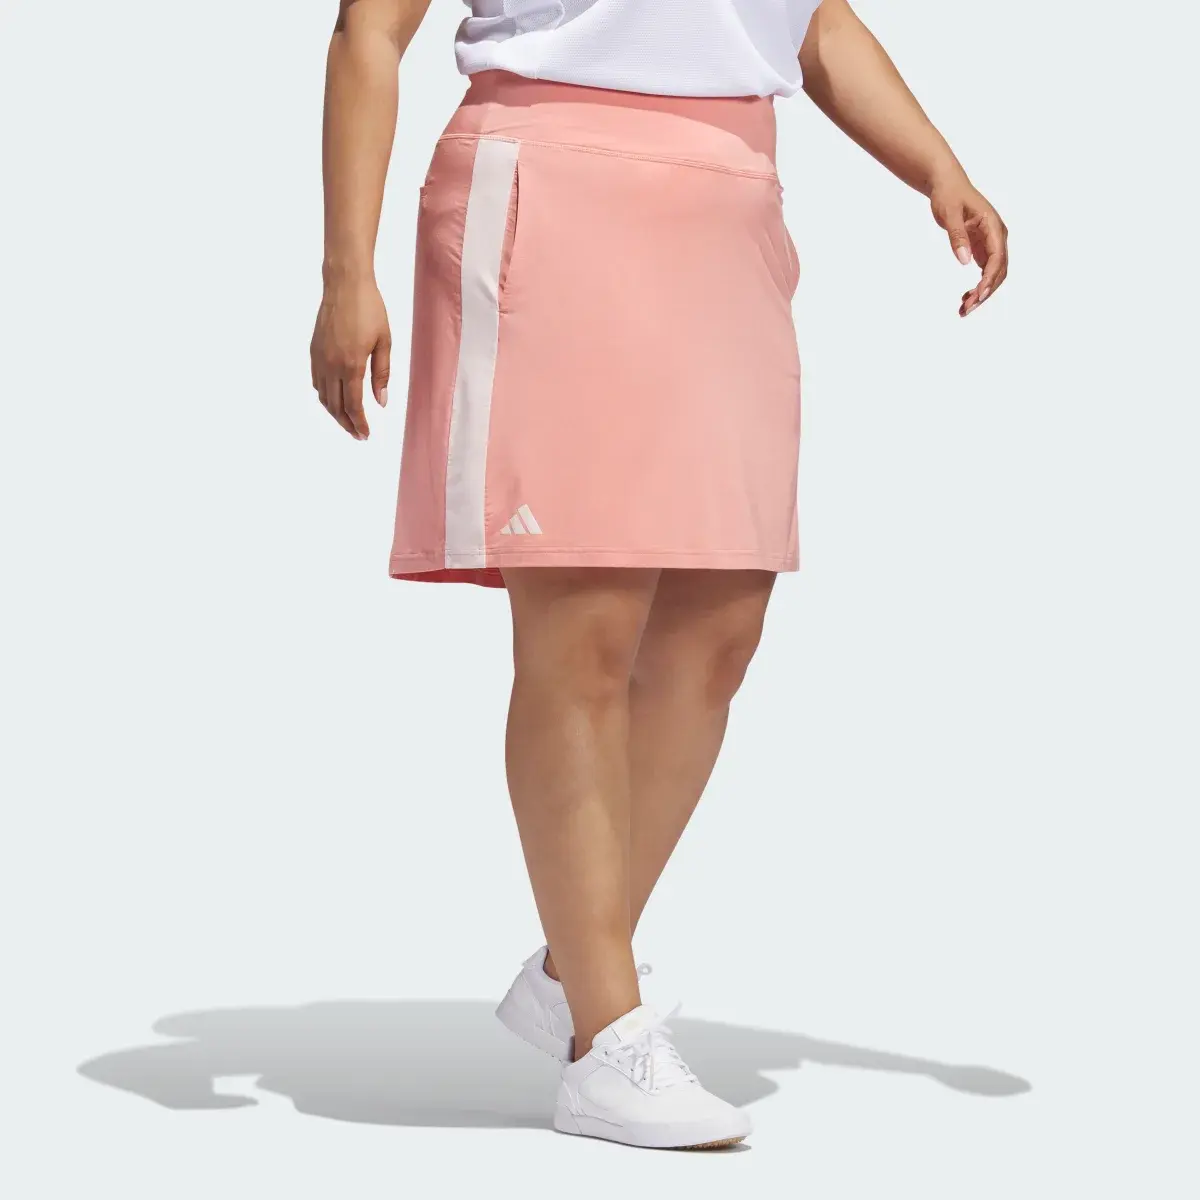 Adidas Made With Nature Golf Skort (Plus Size). 3